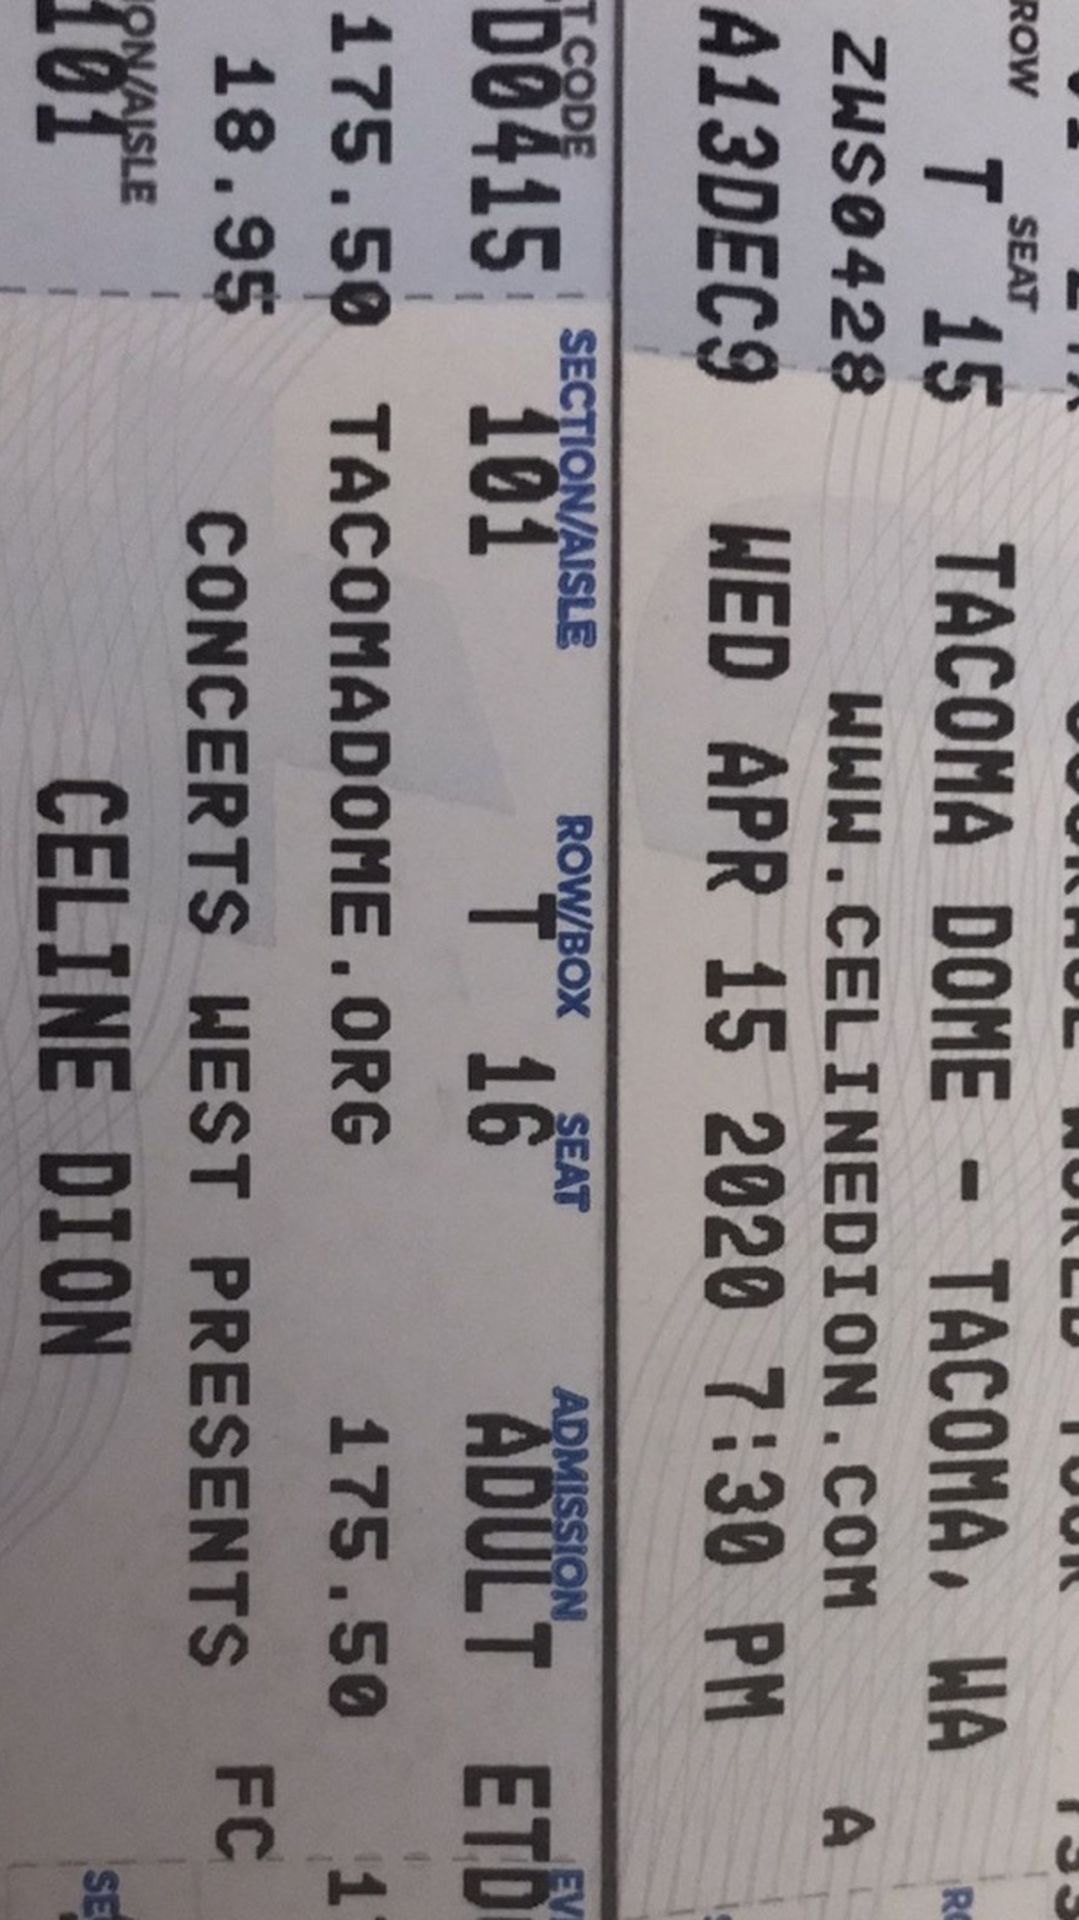 2-CELINE DION TICKETS Rescheduled For Aug 26 Th